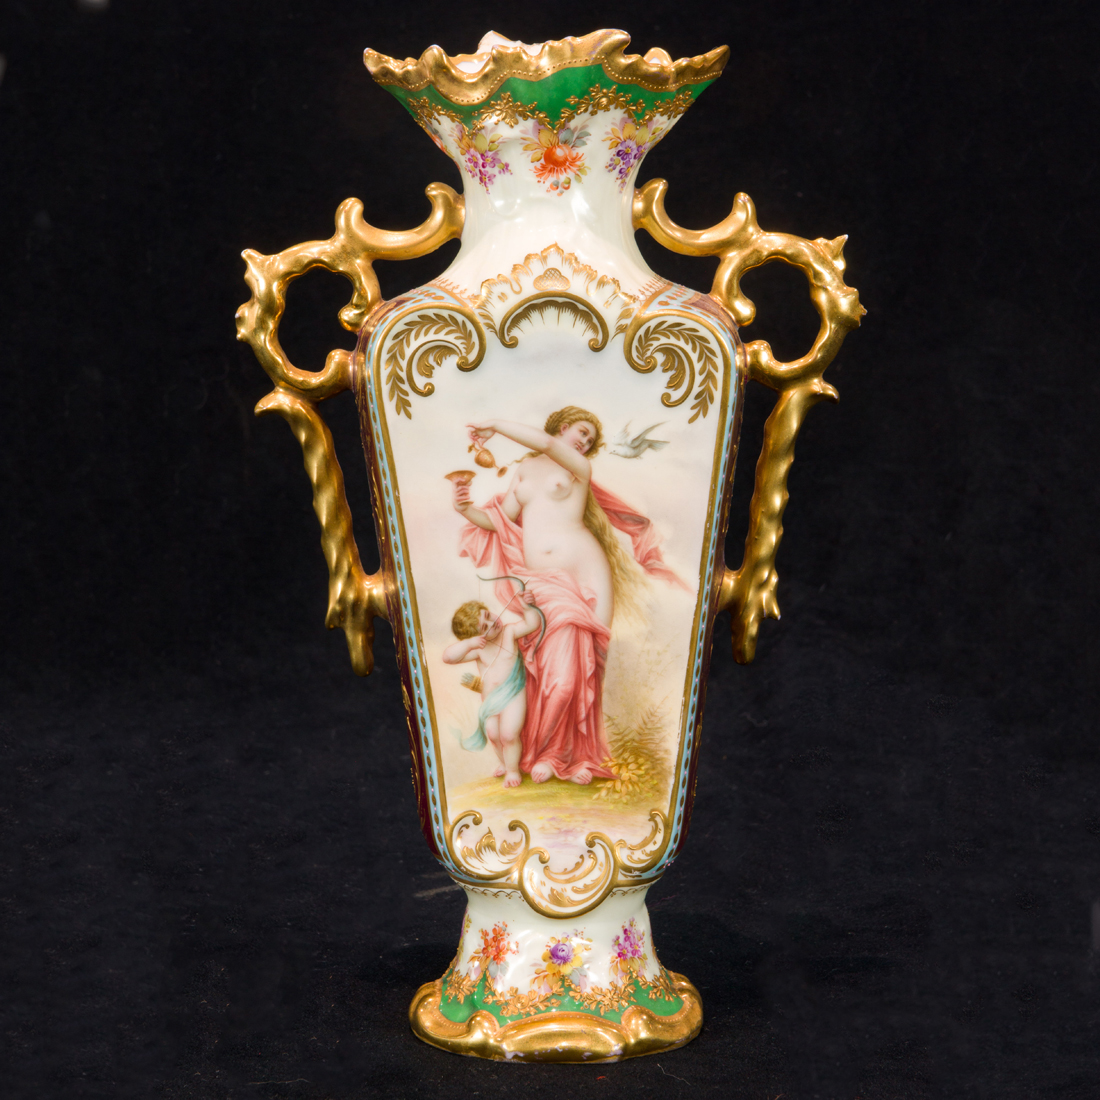 A VIENNA STYLE PORCELAIN CABINET